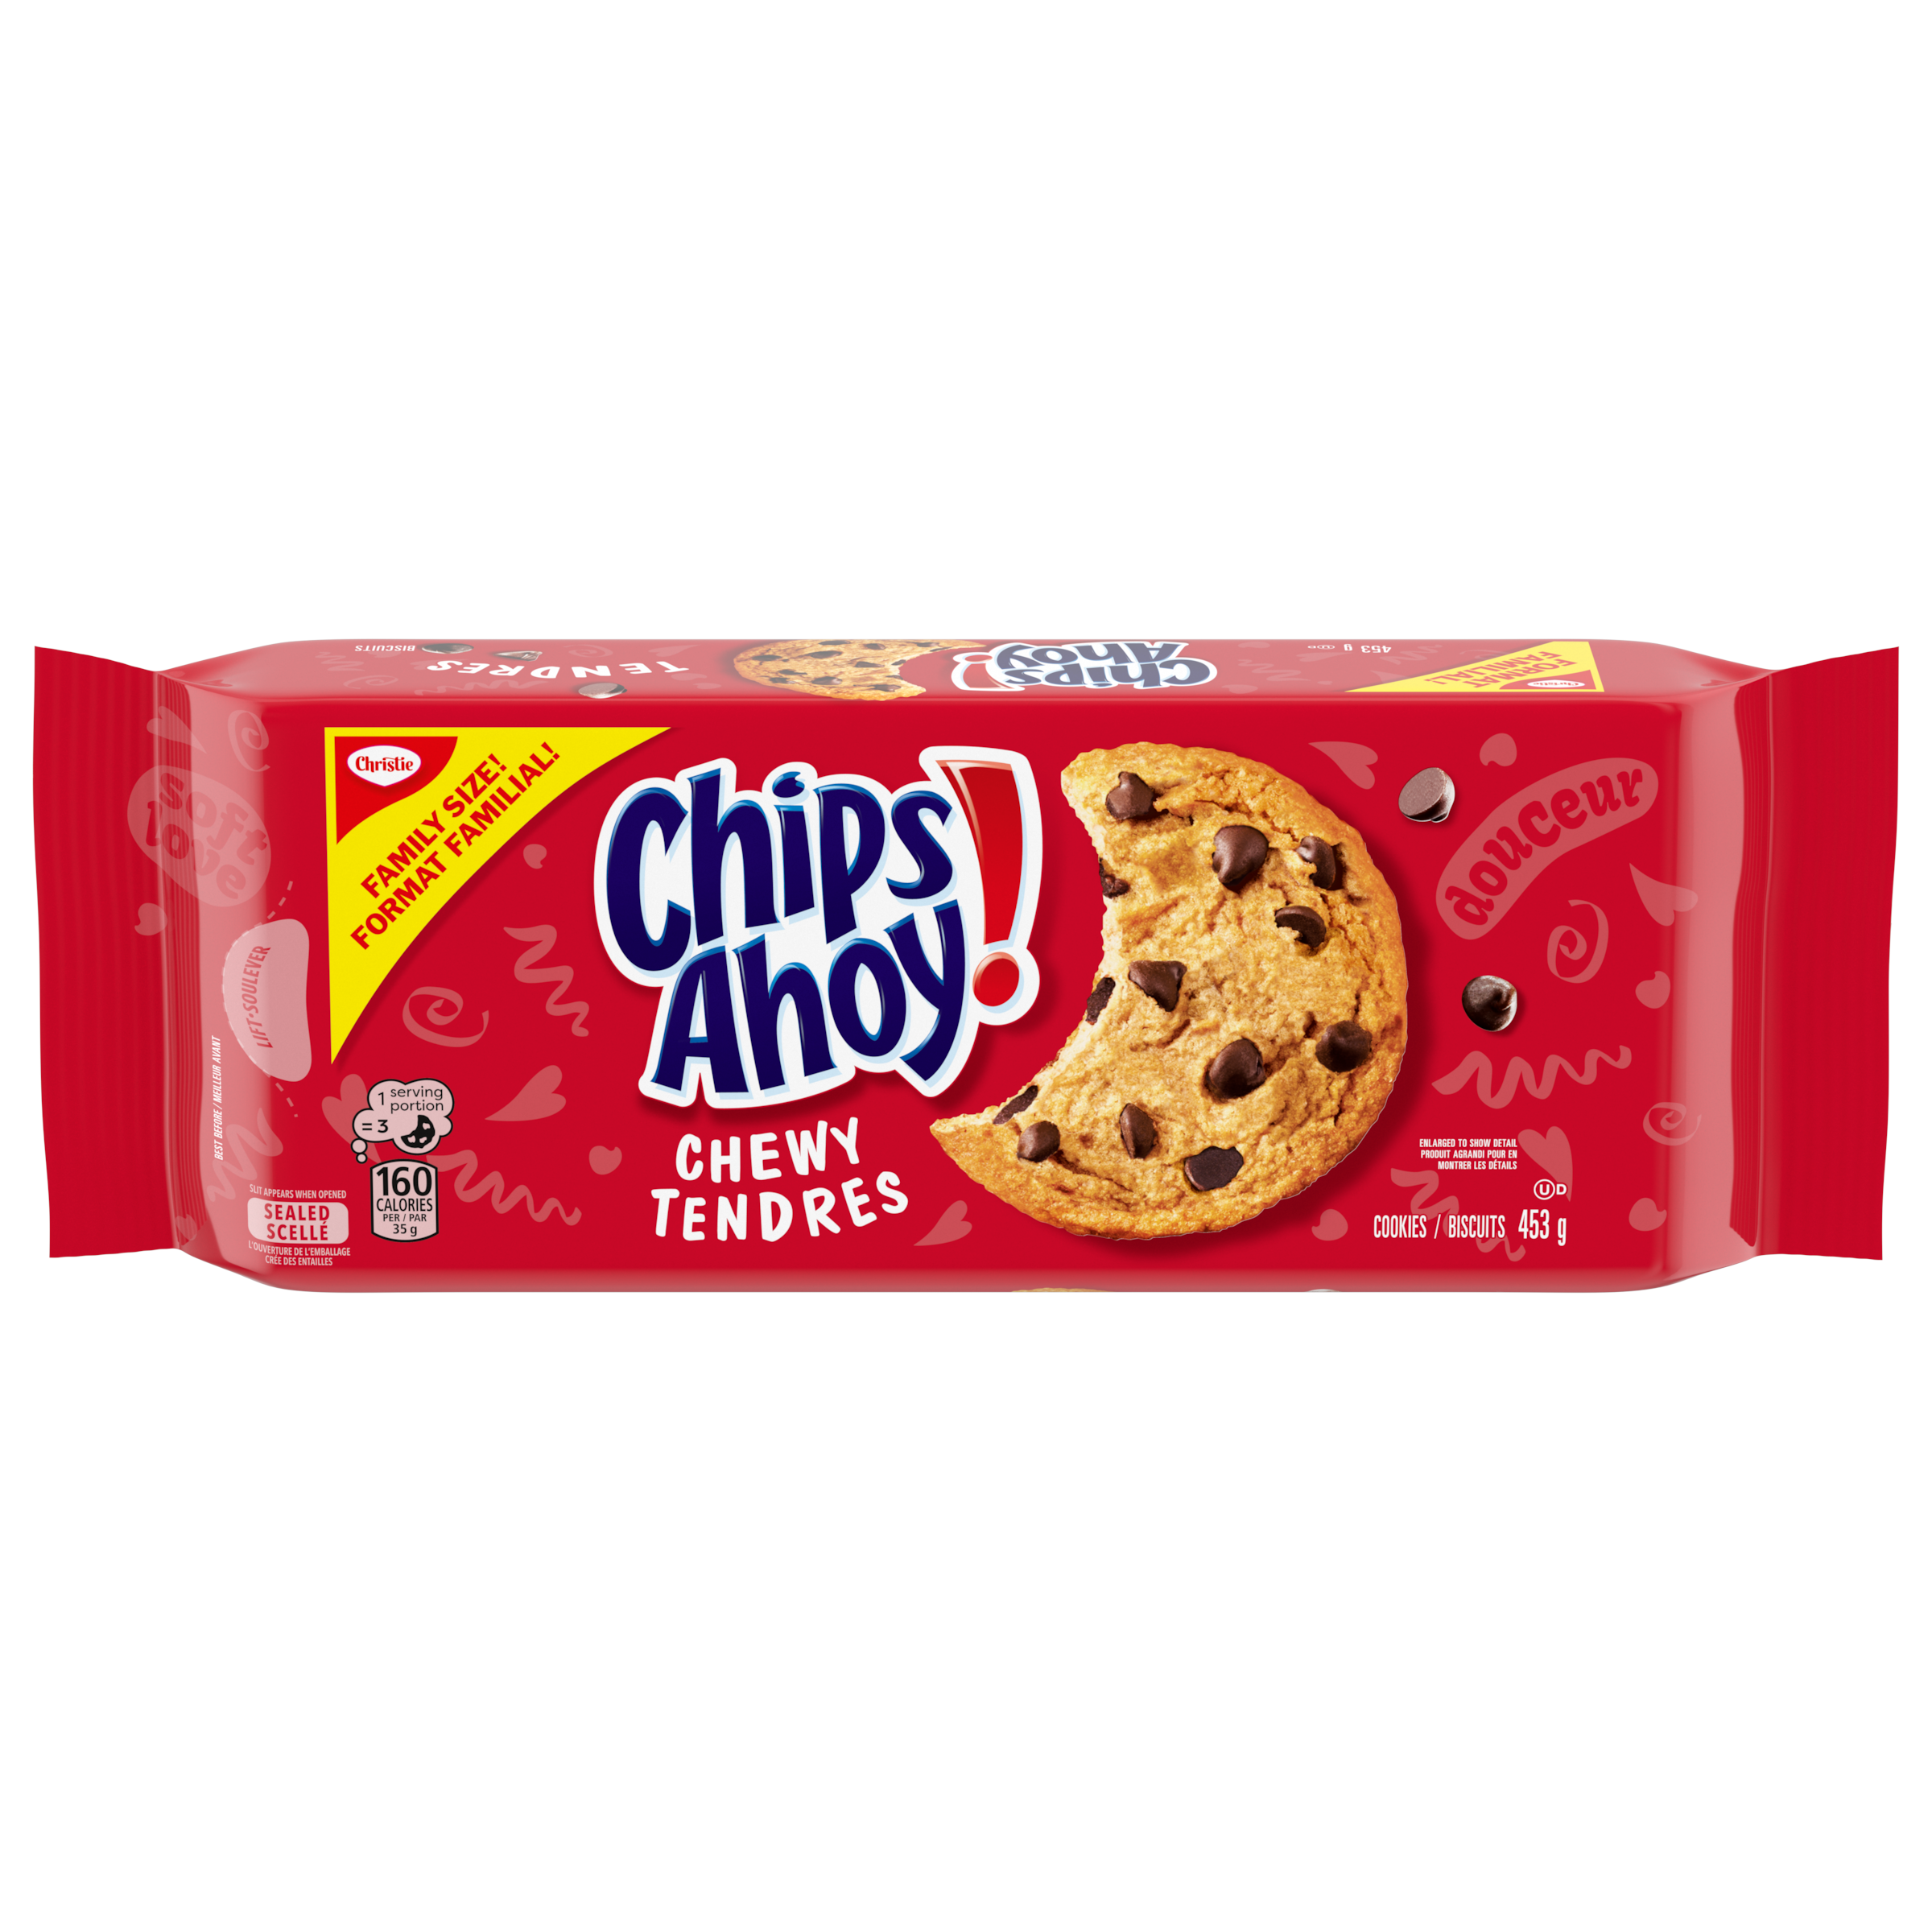 Chips Ahoy! Chewy Chocolate Chip Cookies, 453G-0